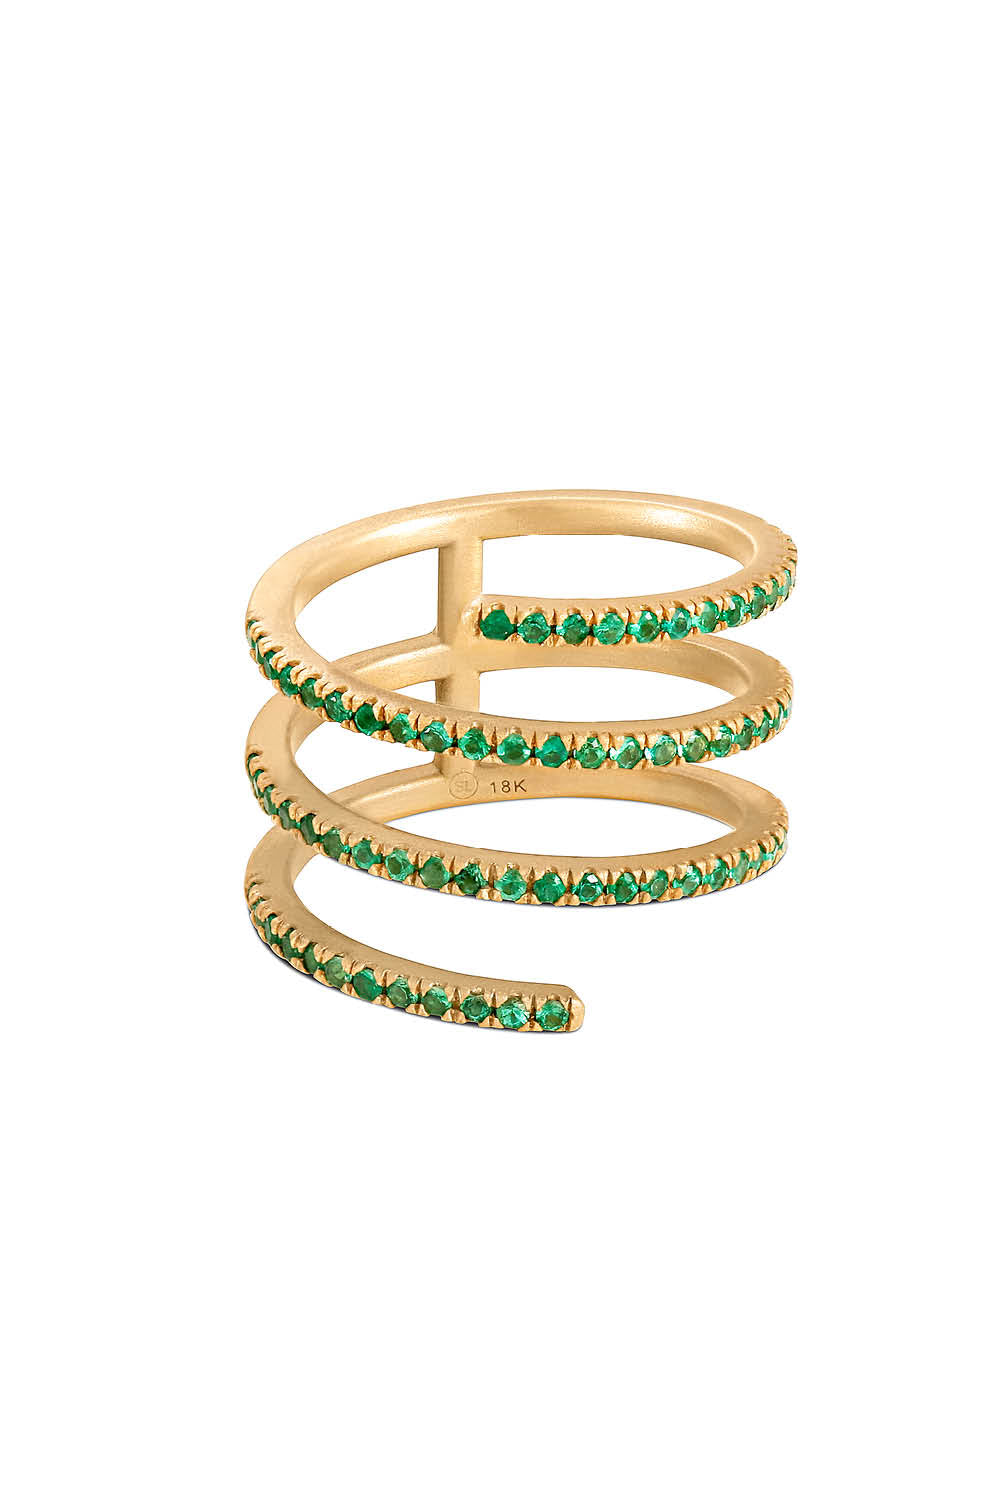 Sandy Leong Emerald Coil Ring